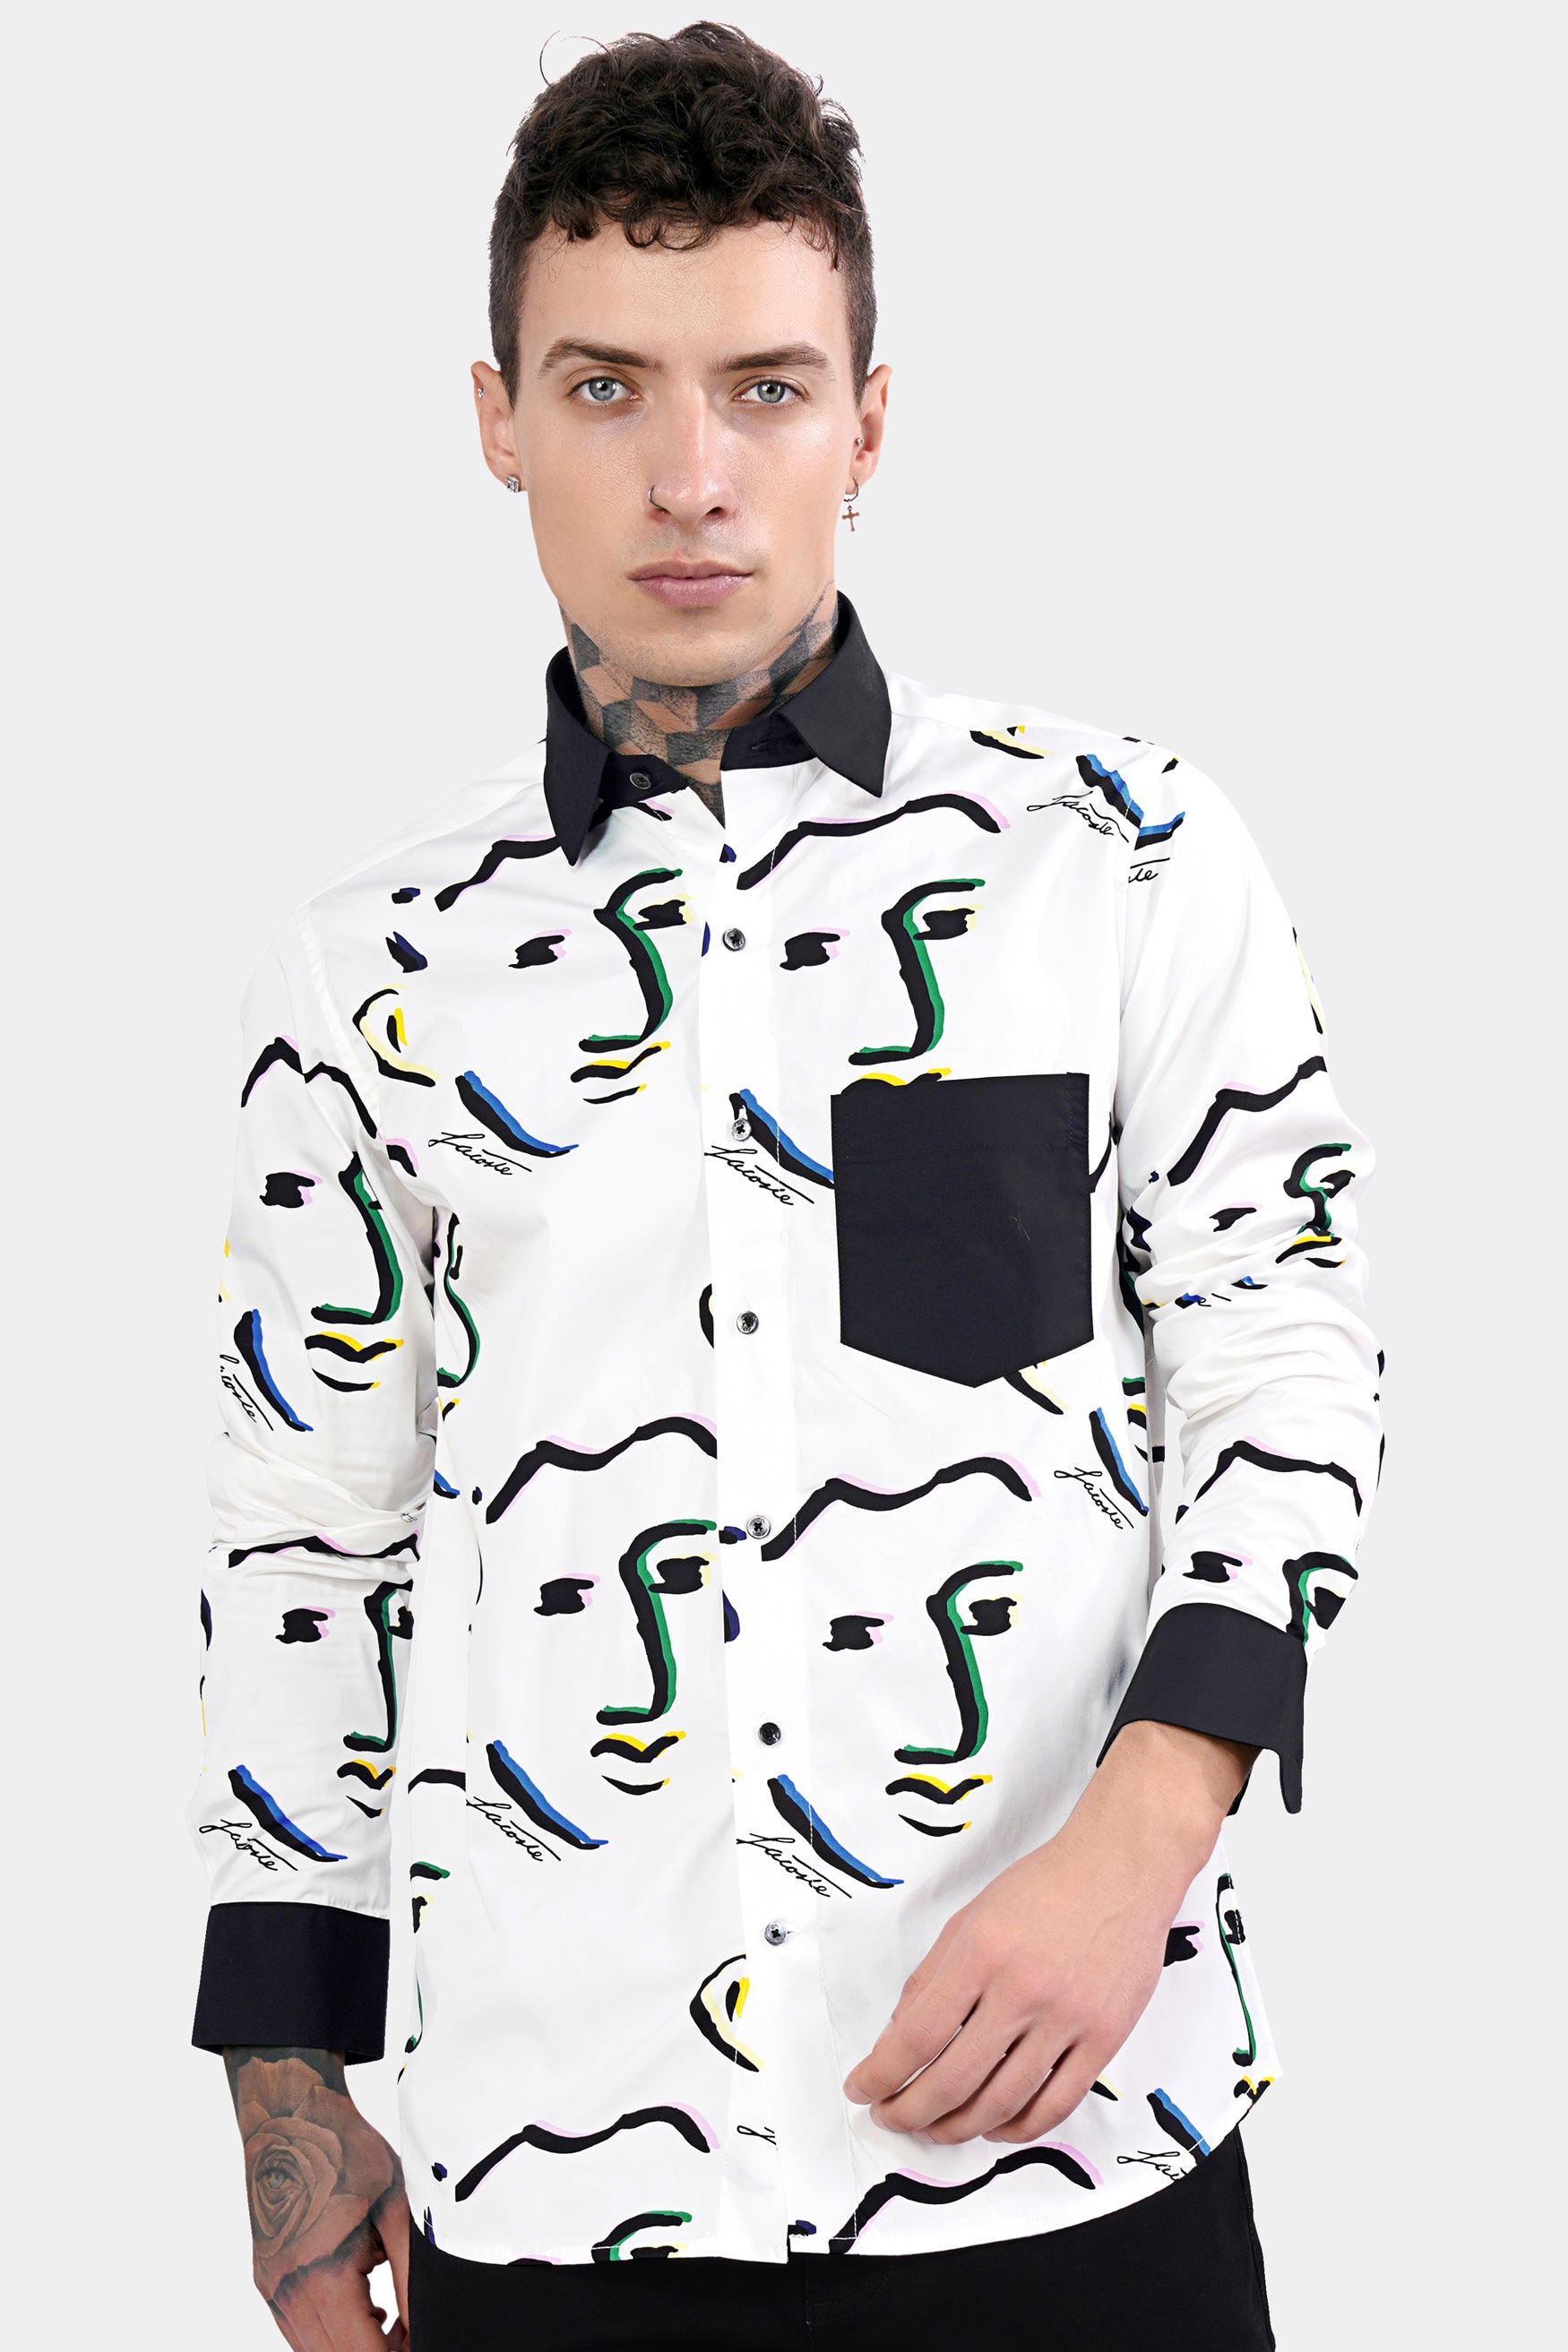 Bright White Faces Printed with Black Cuffs and Collar Premium Cotton Shirt